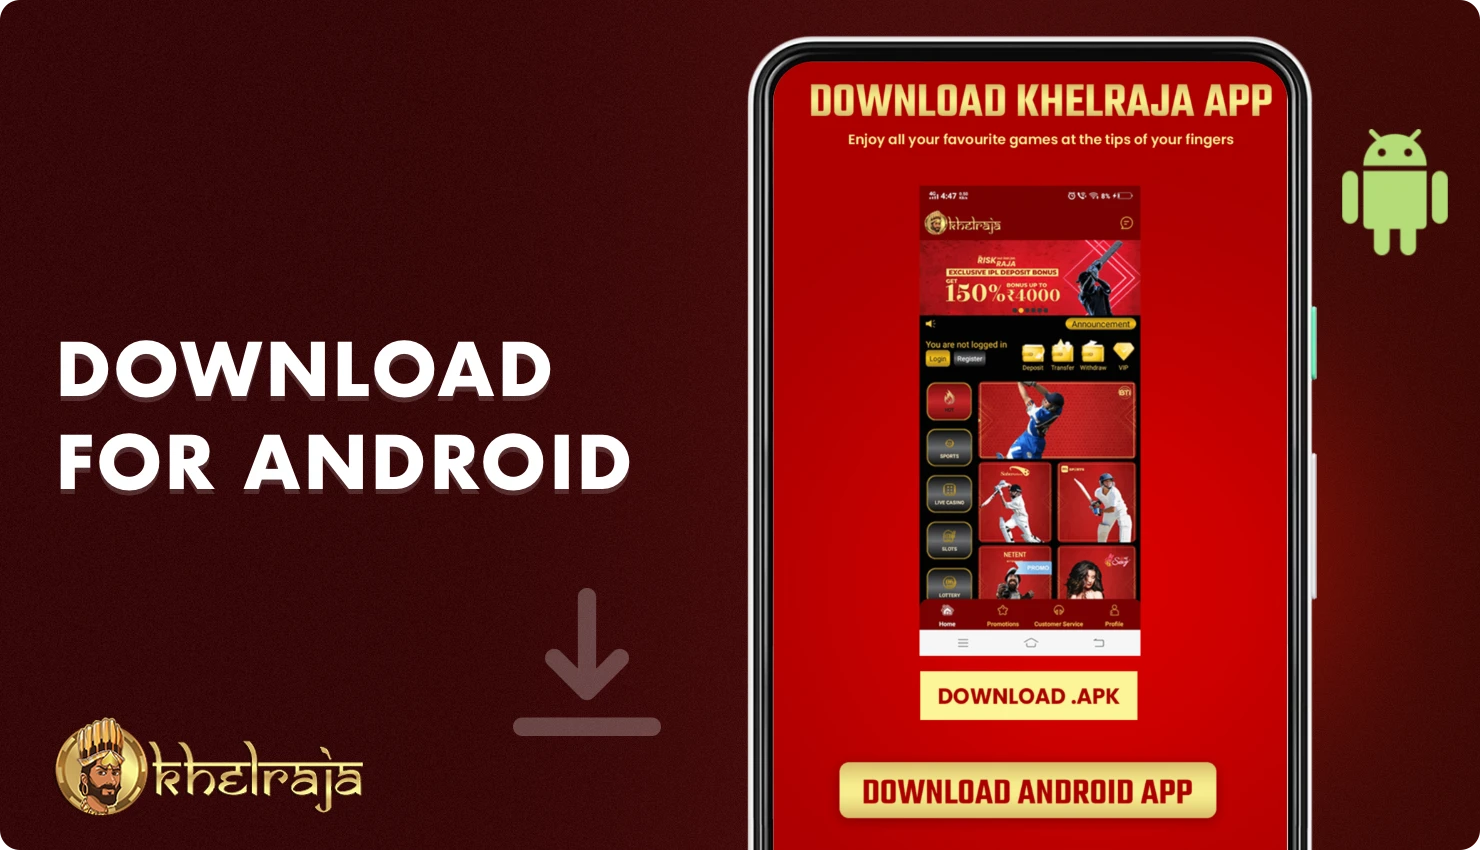 To download the Khelraja app for Android go to the official website of the company